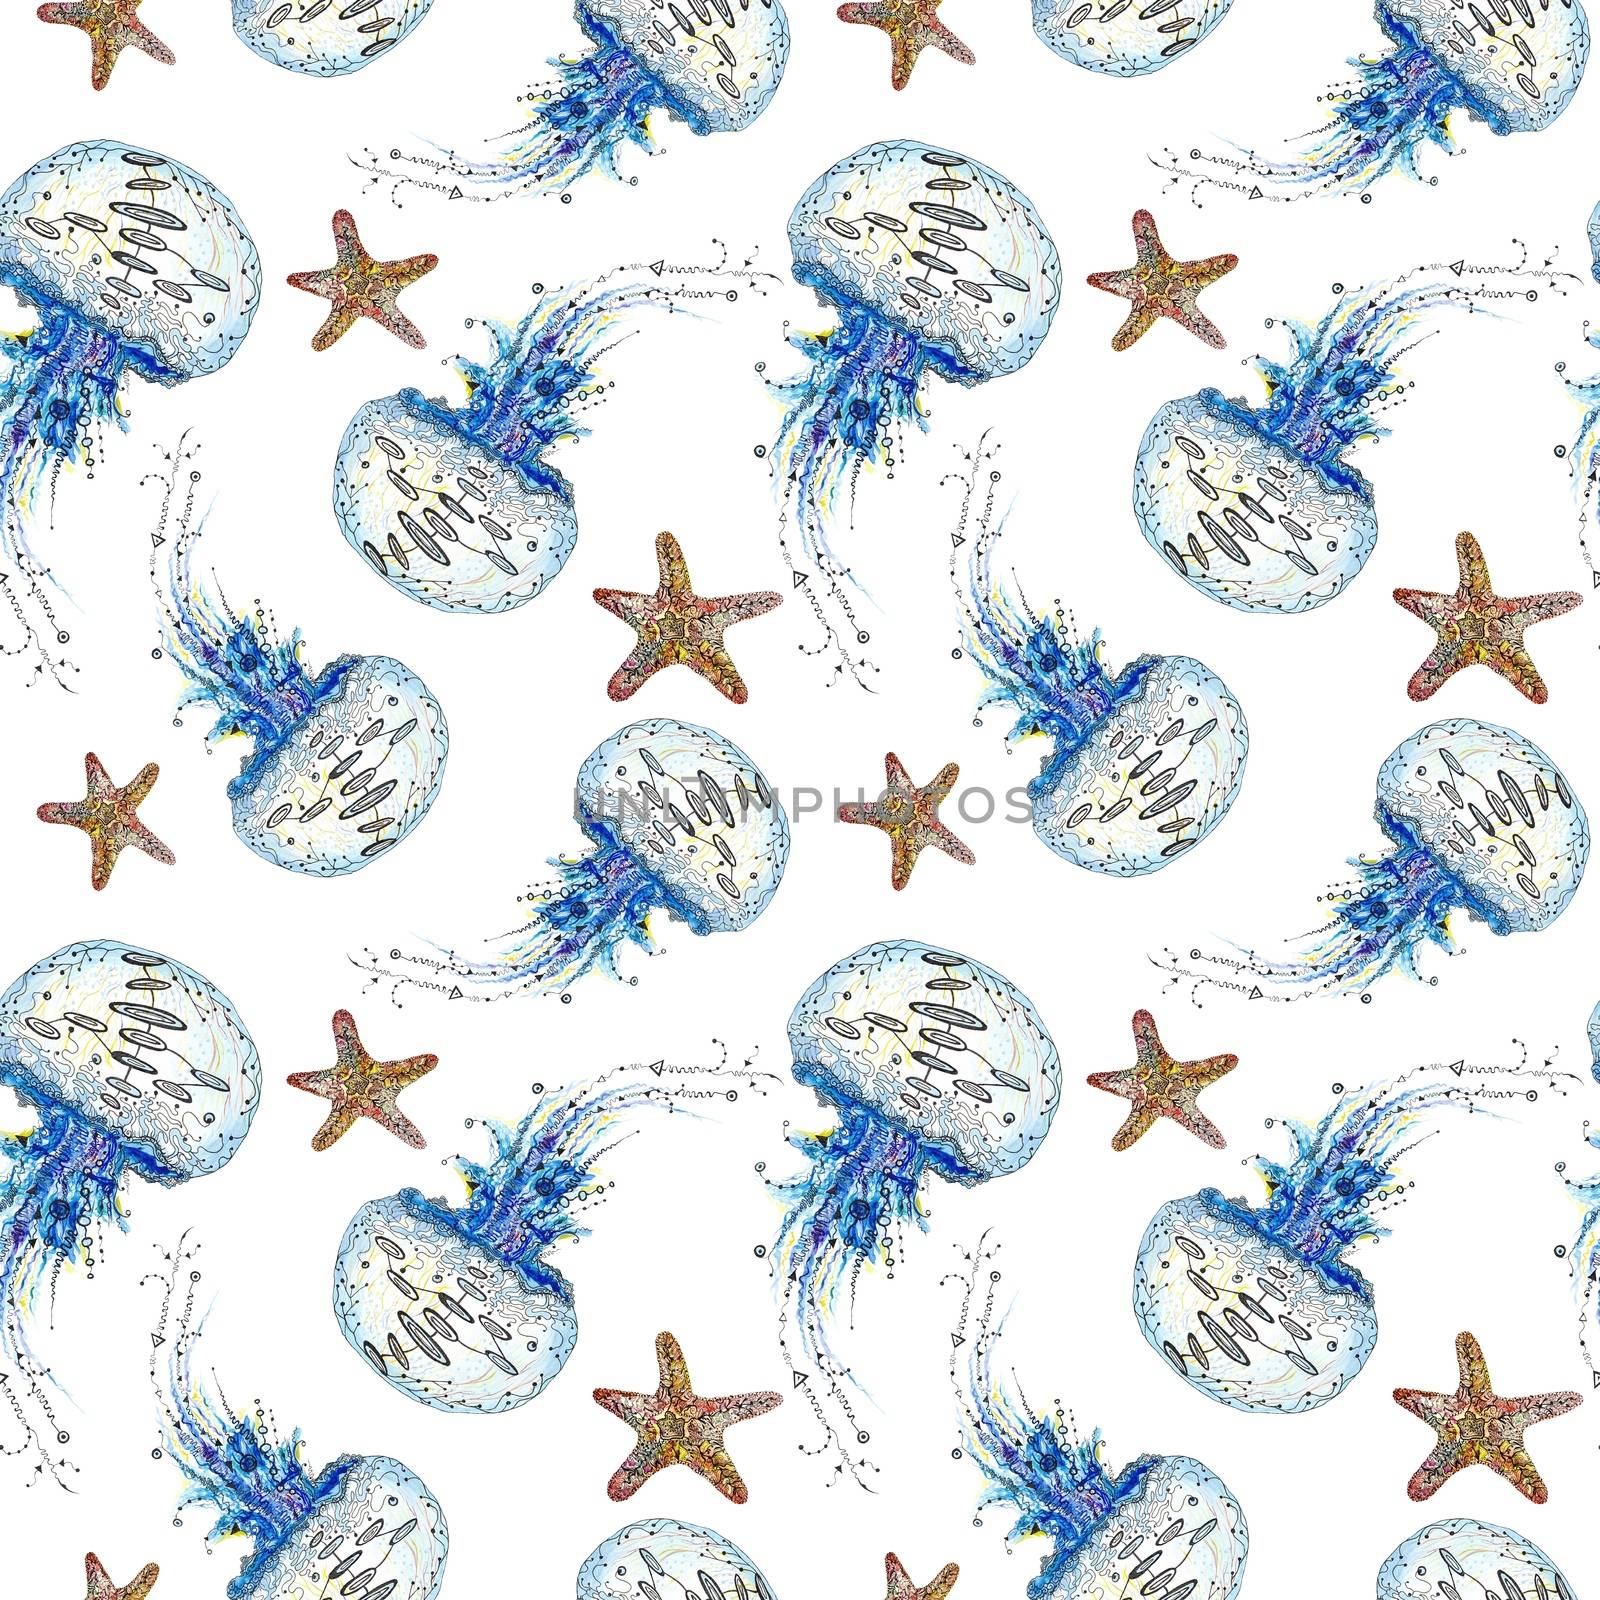 Seamless marine texture with sea animals in sketch style on white background for paper and textile design